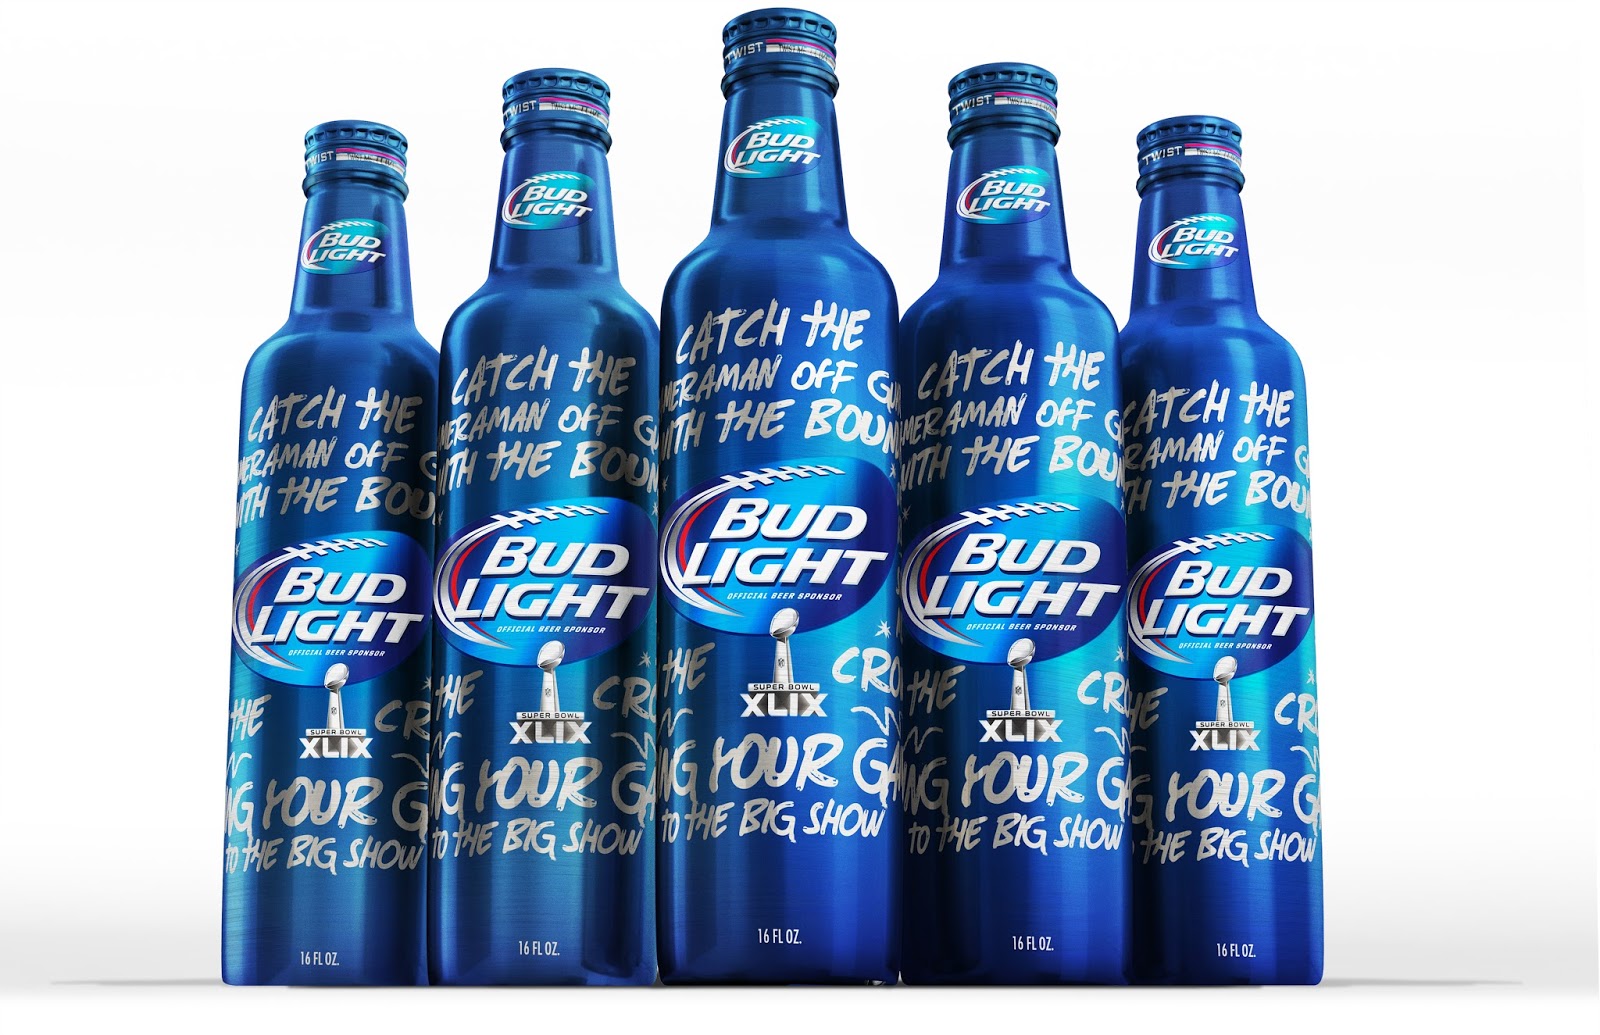 Bud Light Super Bowl XLIX Limited Edition Bottle on Packaging of the